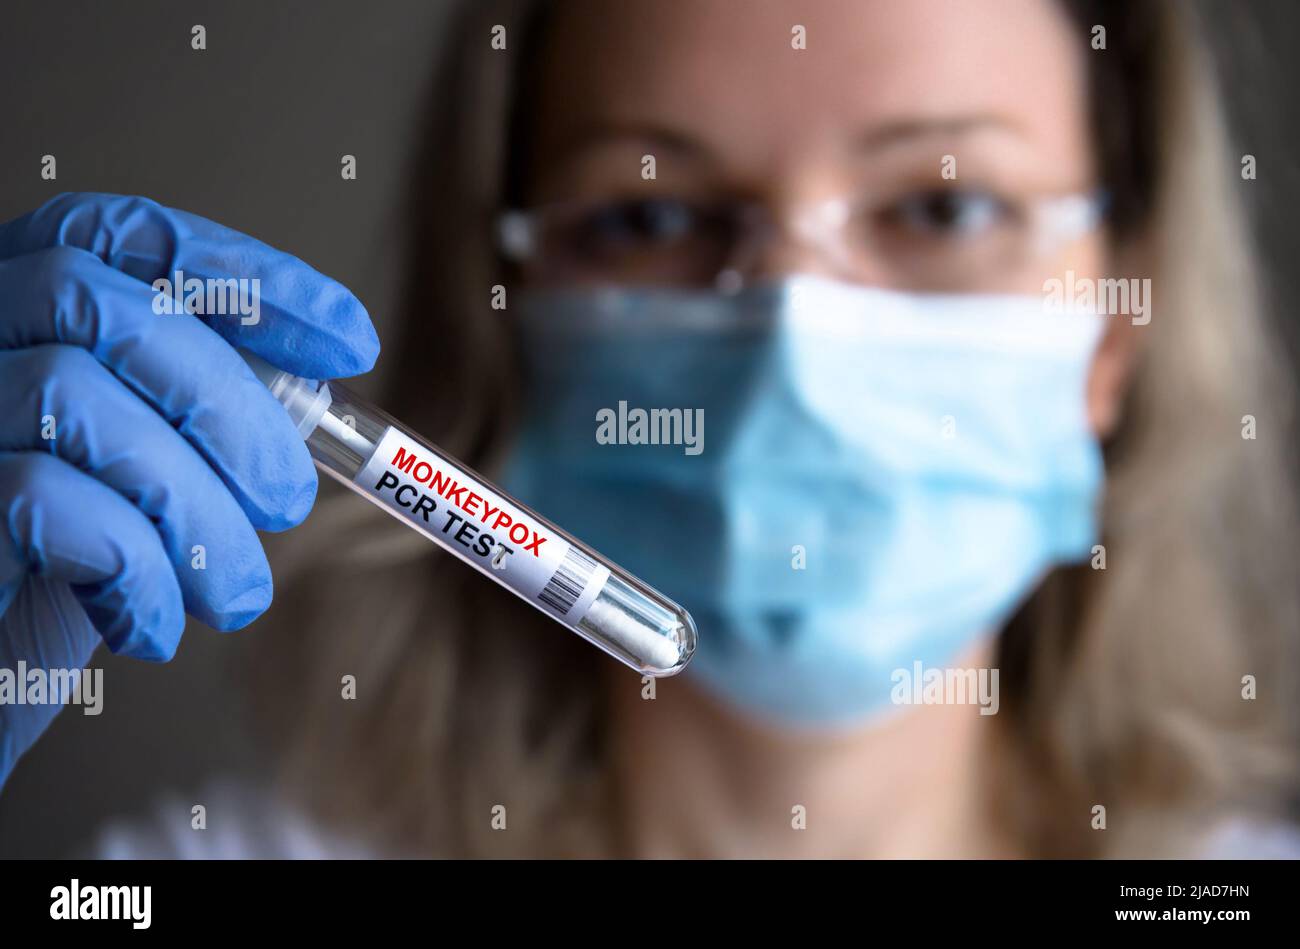 Monkeypox PCR test tube in doctors hand, medical worker in medical mask shows swab collection kit for smallpox virus diagnosis and monkey pox research Stock Photo